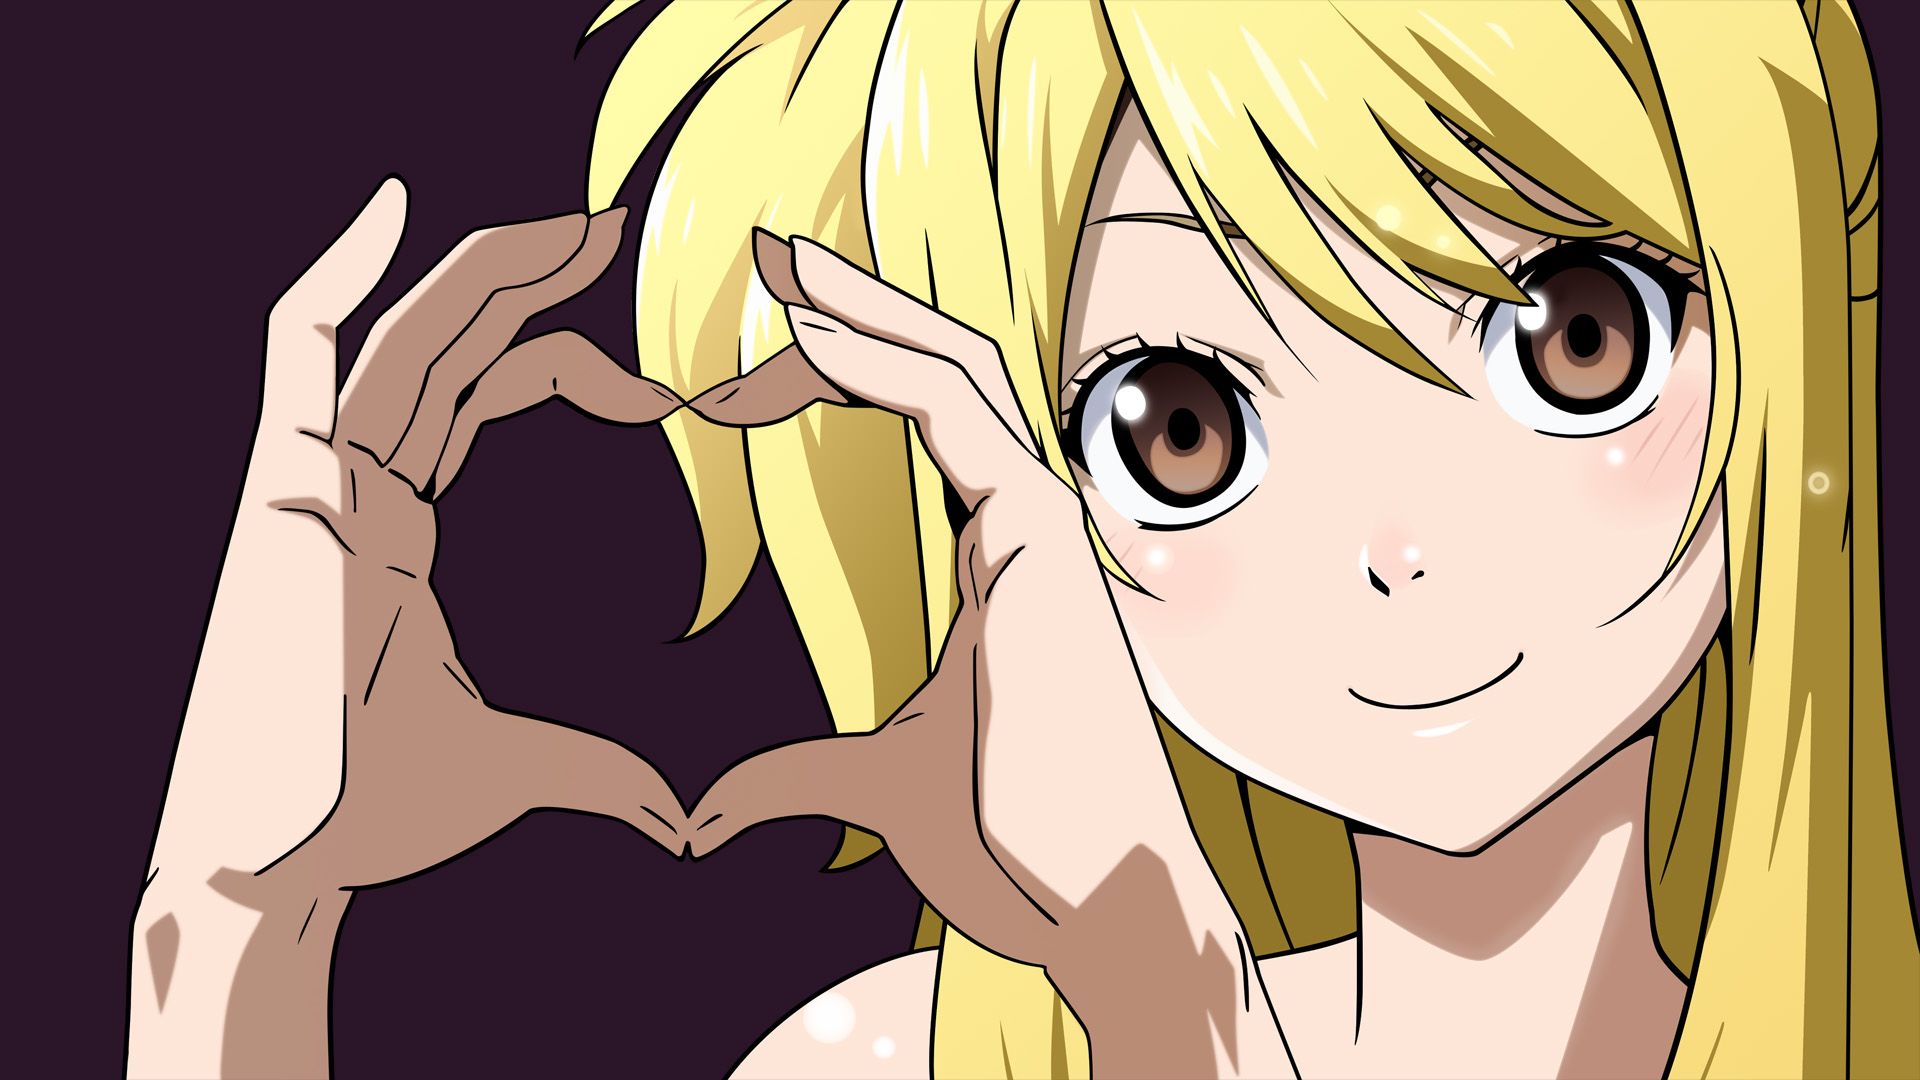 Lucy Heartfilia Fairy Tail Natsu Dragneel Erza Scarlet Anime, fairy tail,  chibi, cartoon png | PNGEgg